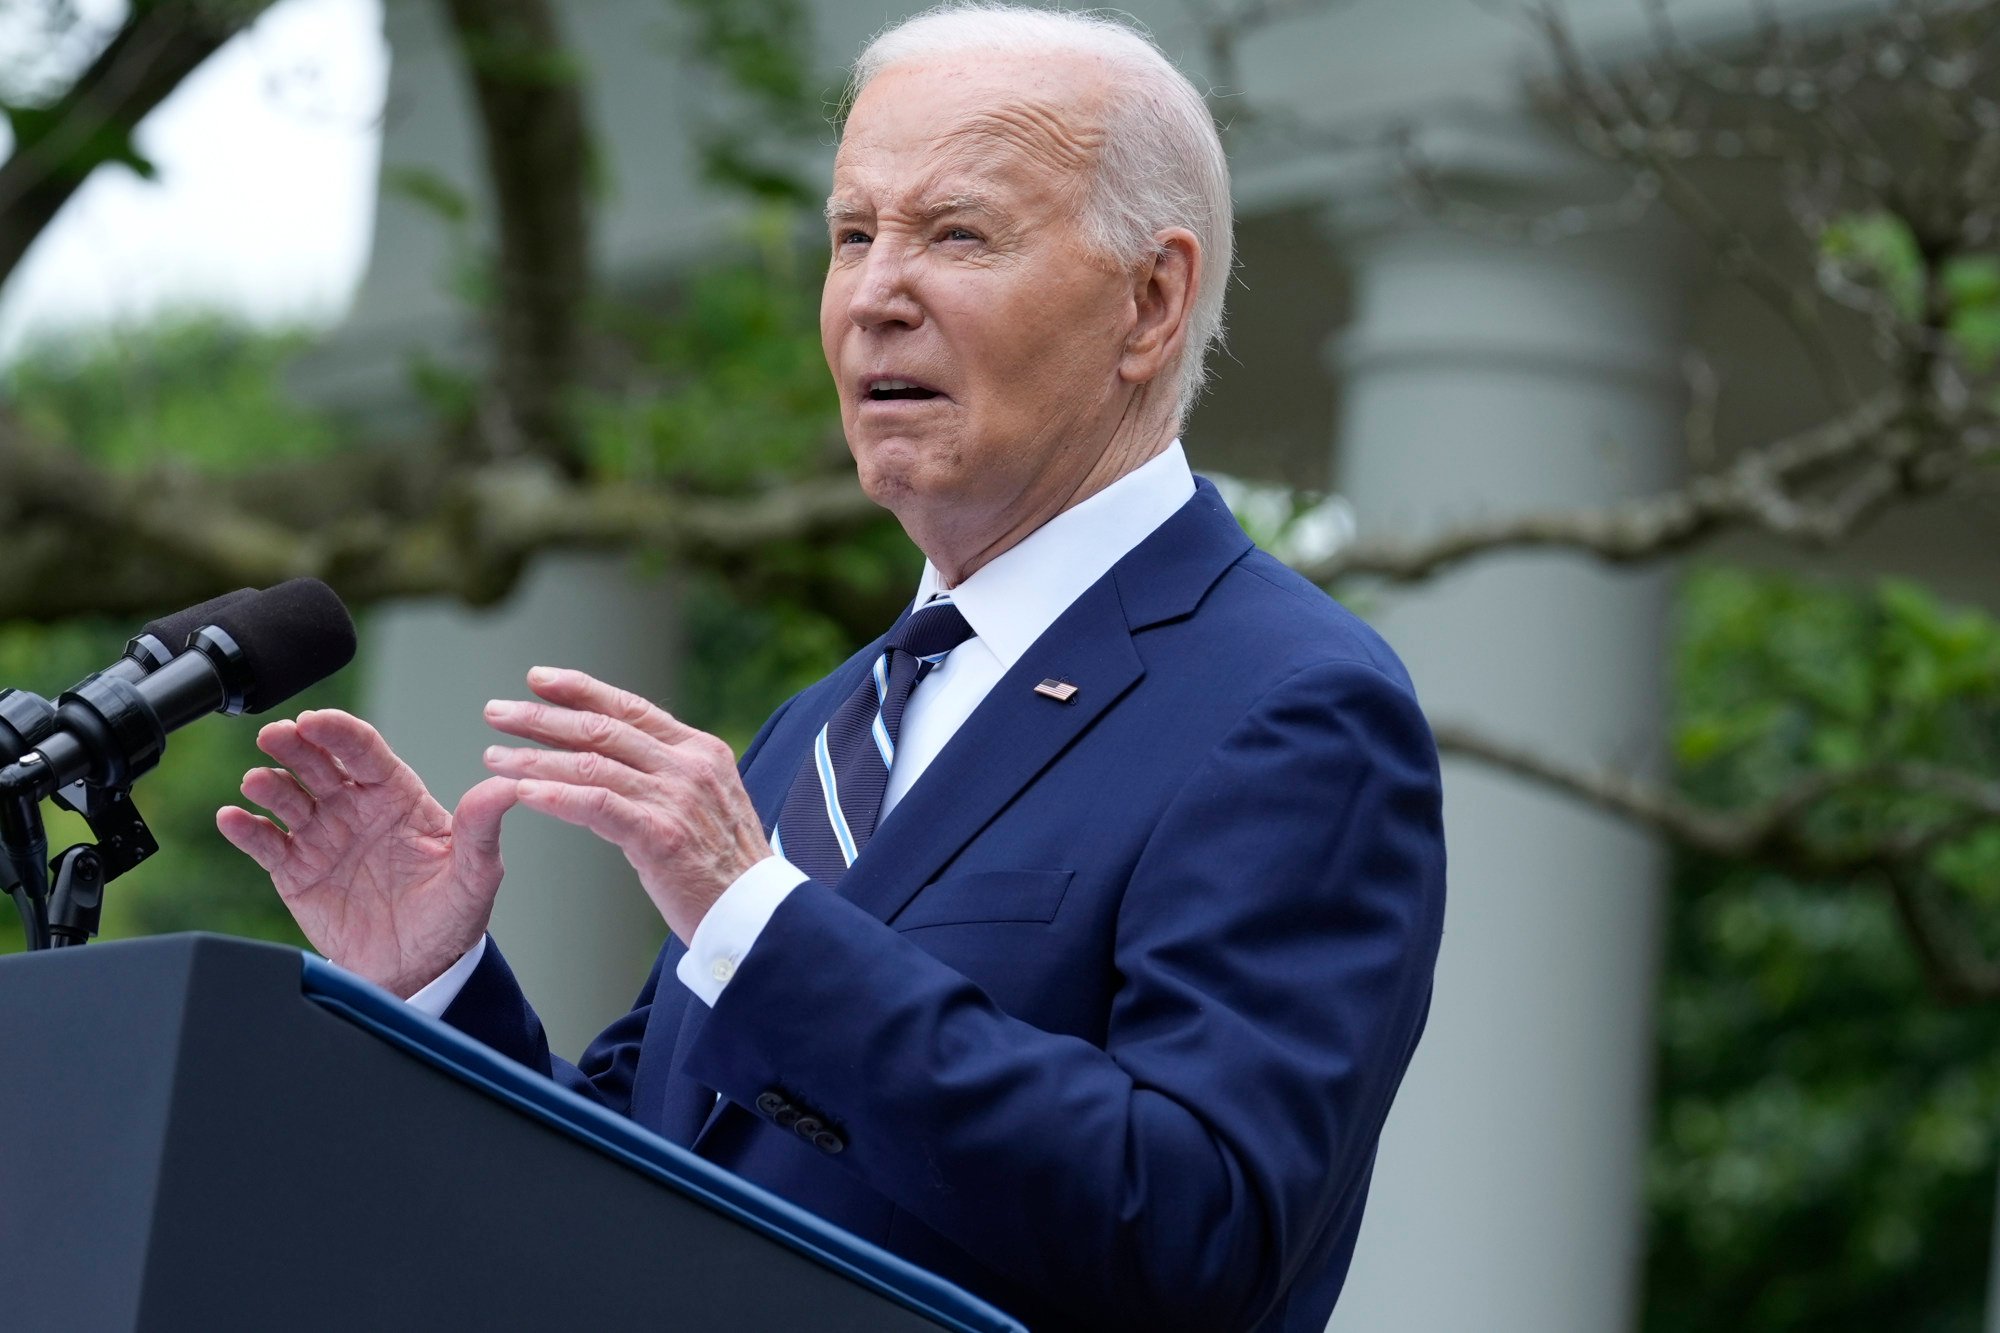 US President Joe Biden at the White House on May 14, announcing plans to impose major new tariffs on electric vehicles, semiconductors, solar equipment and medical supplies imported from China. Photo: AP